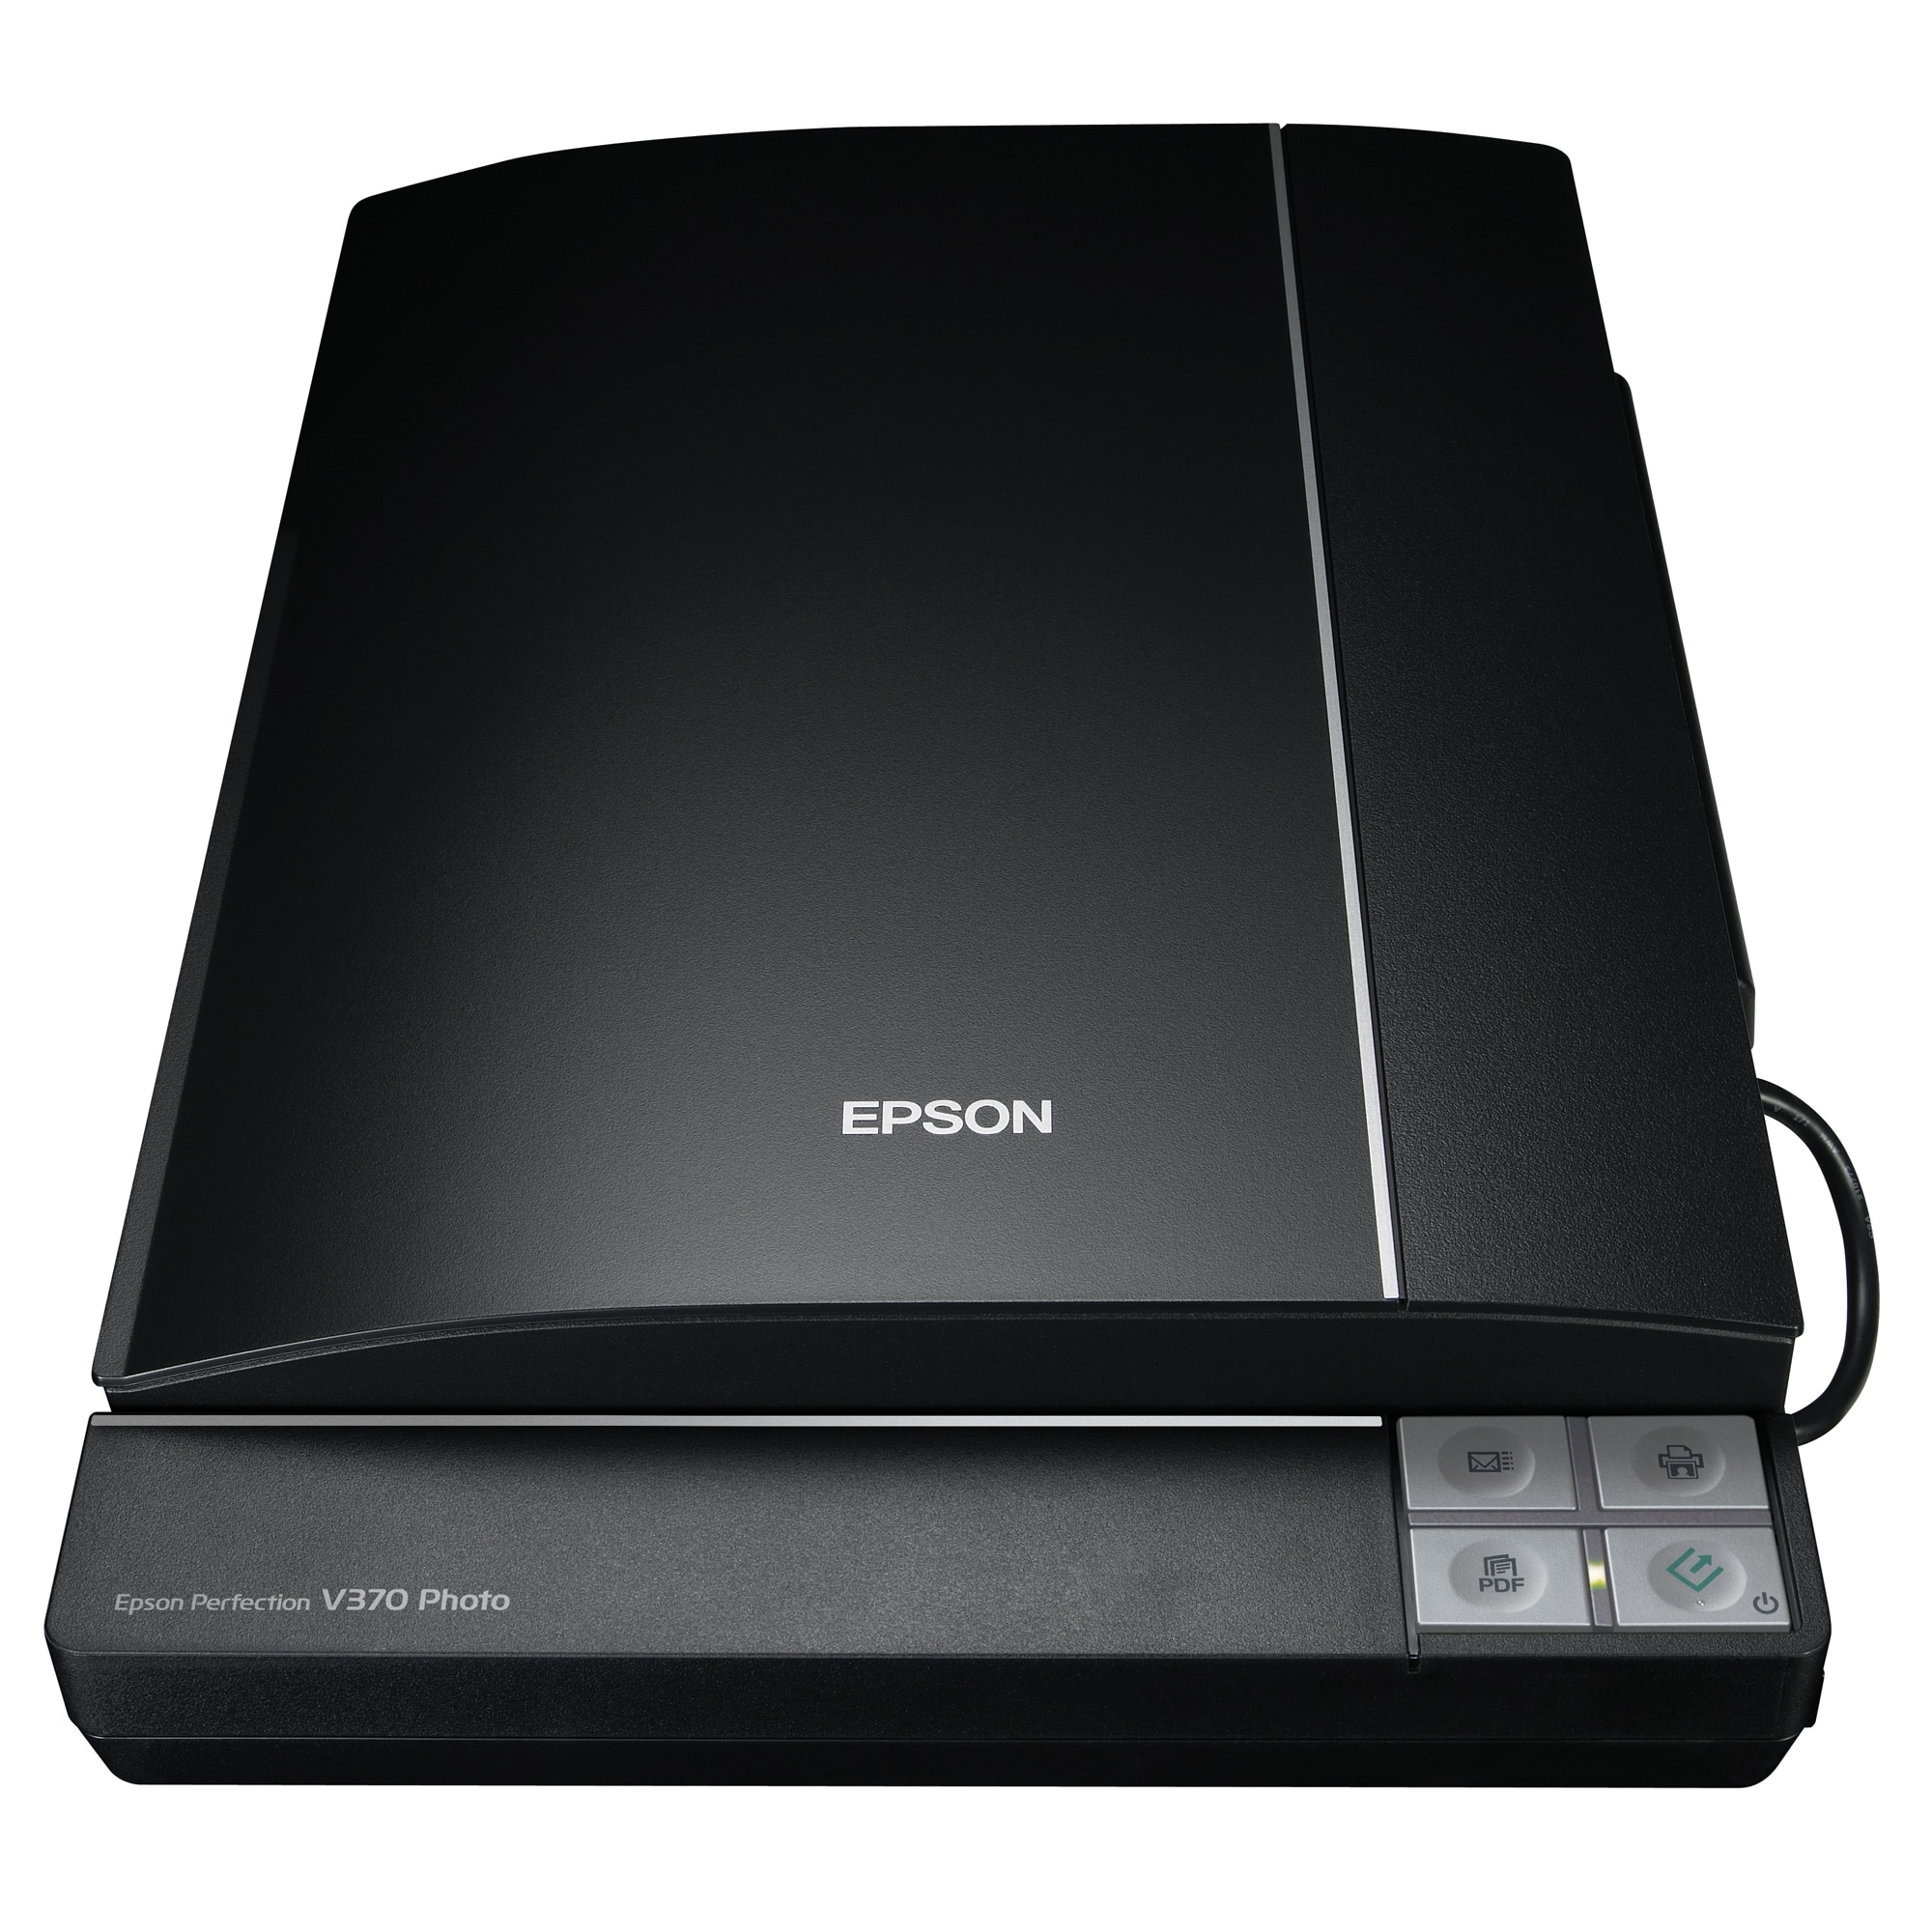  Scanner  Epson  Perfection V370  Photo A4 eMAG ro